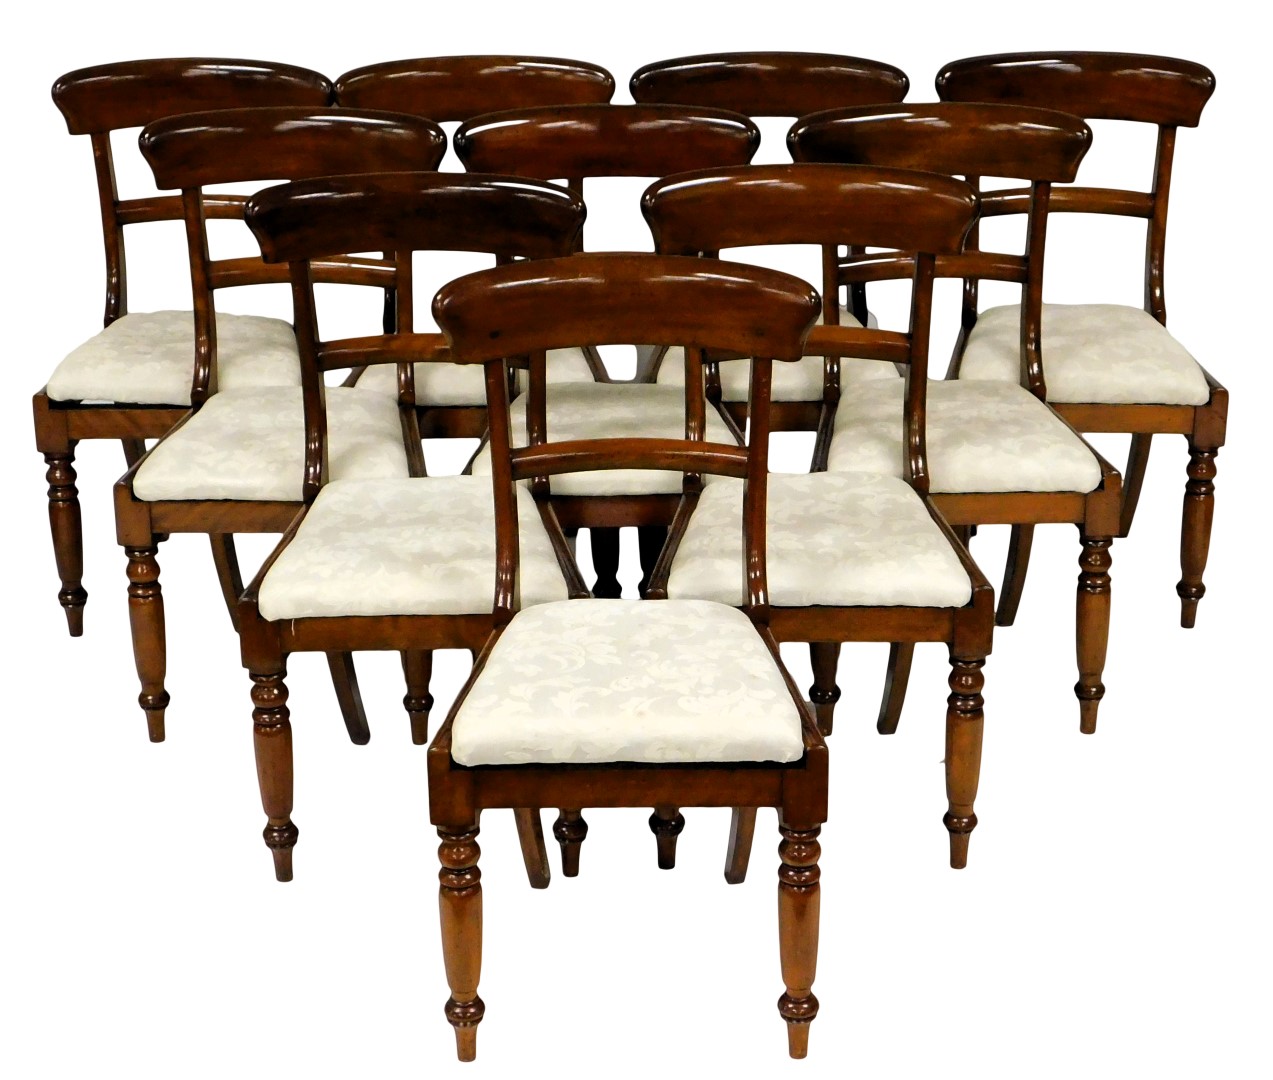 A set of ten early Victorian mahogany dining chairs, each with a plain bar back, a drop in seat, on